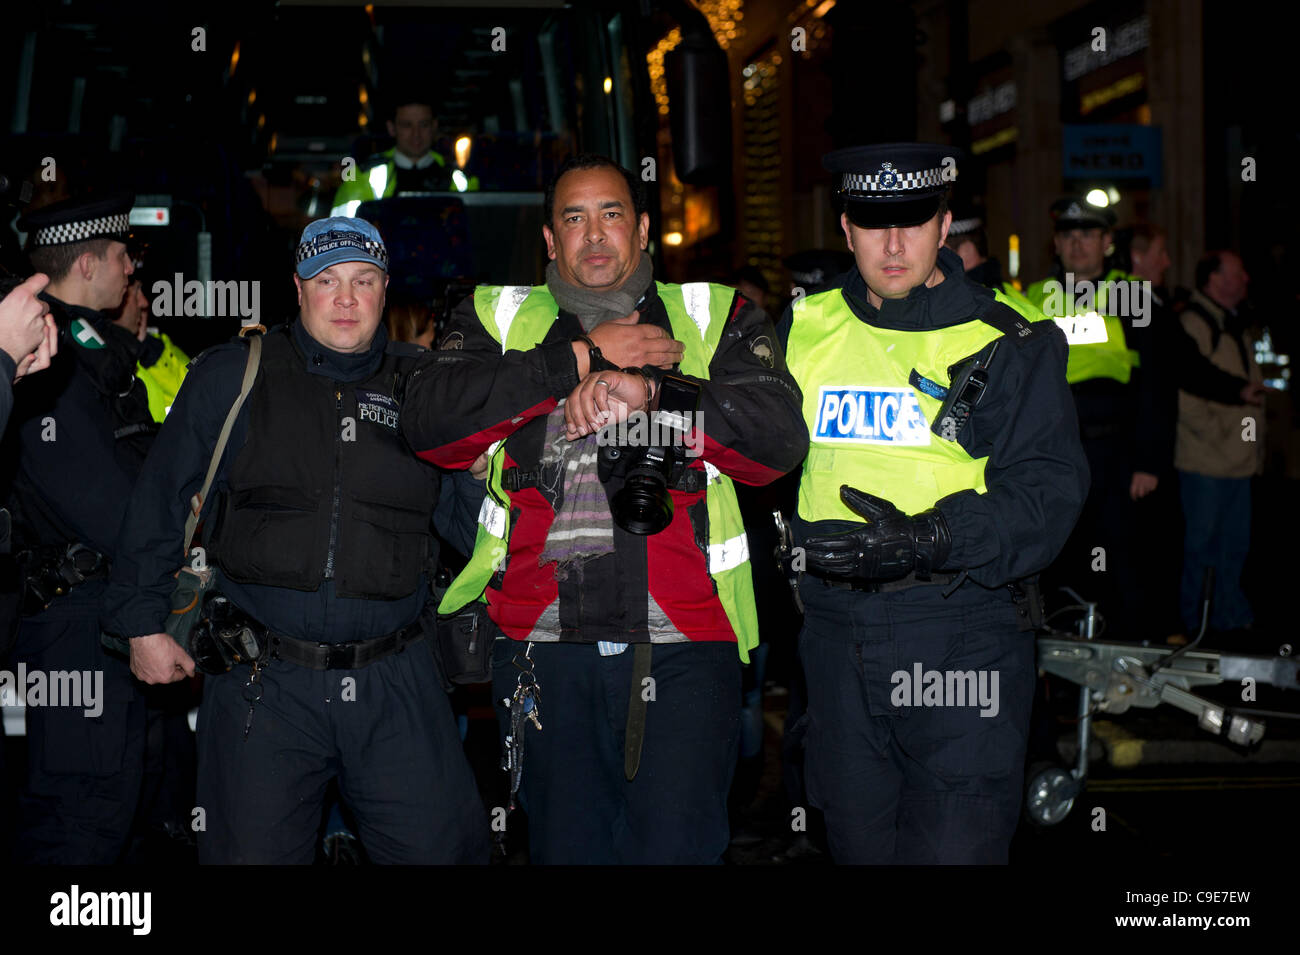 30th Nov 2011, Haymarket, London. A photographer is led away in handcuffs by Police and escorted to a waiting coach after the attempted occupation of Panton House off Haymarket, London. According to some reports, the protesters were thought to be part of Occupy London Stock Exchange (OLSX). Stock Photo